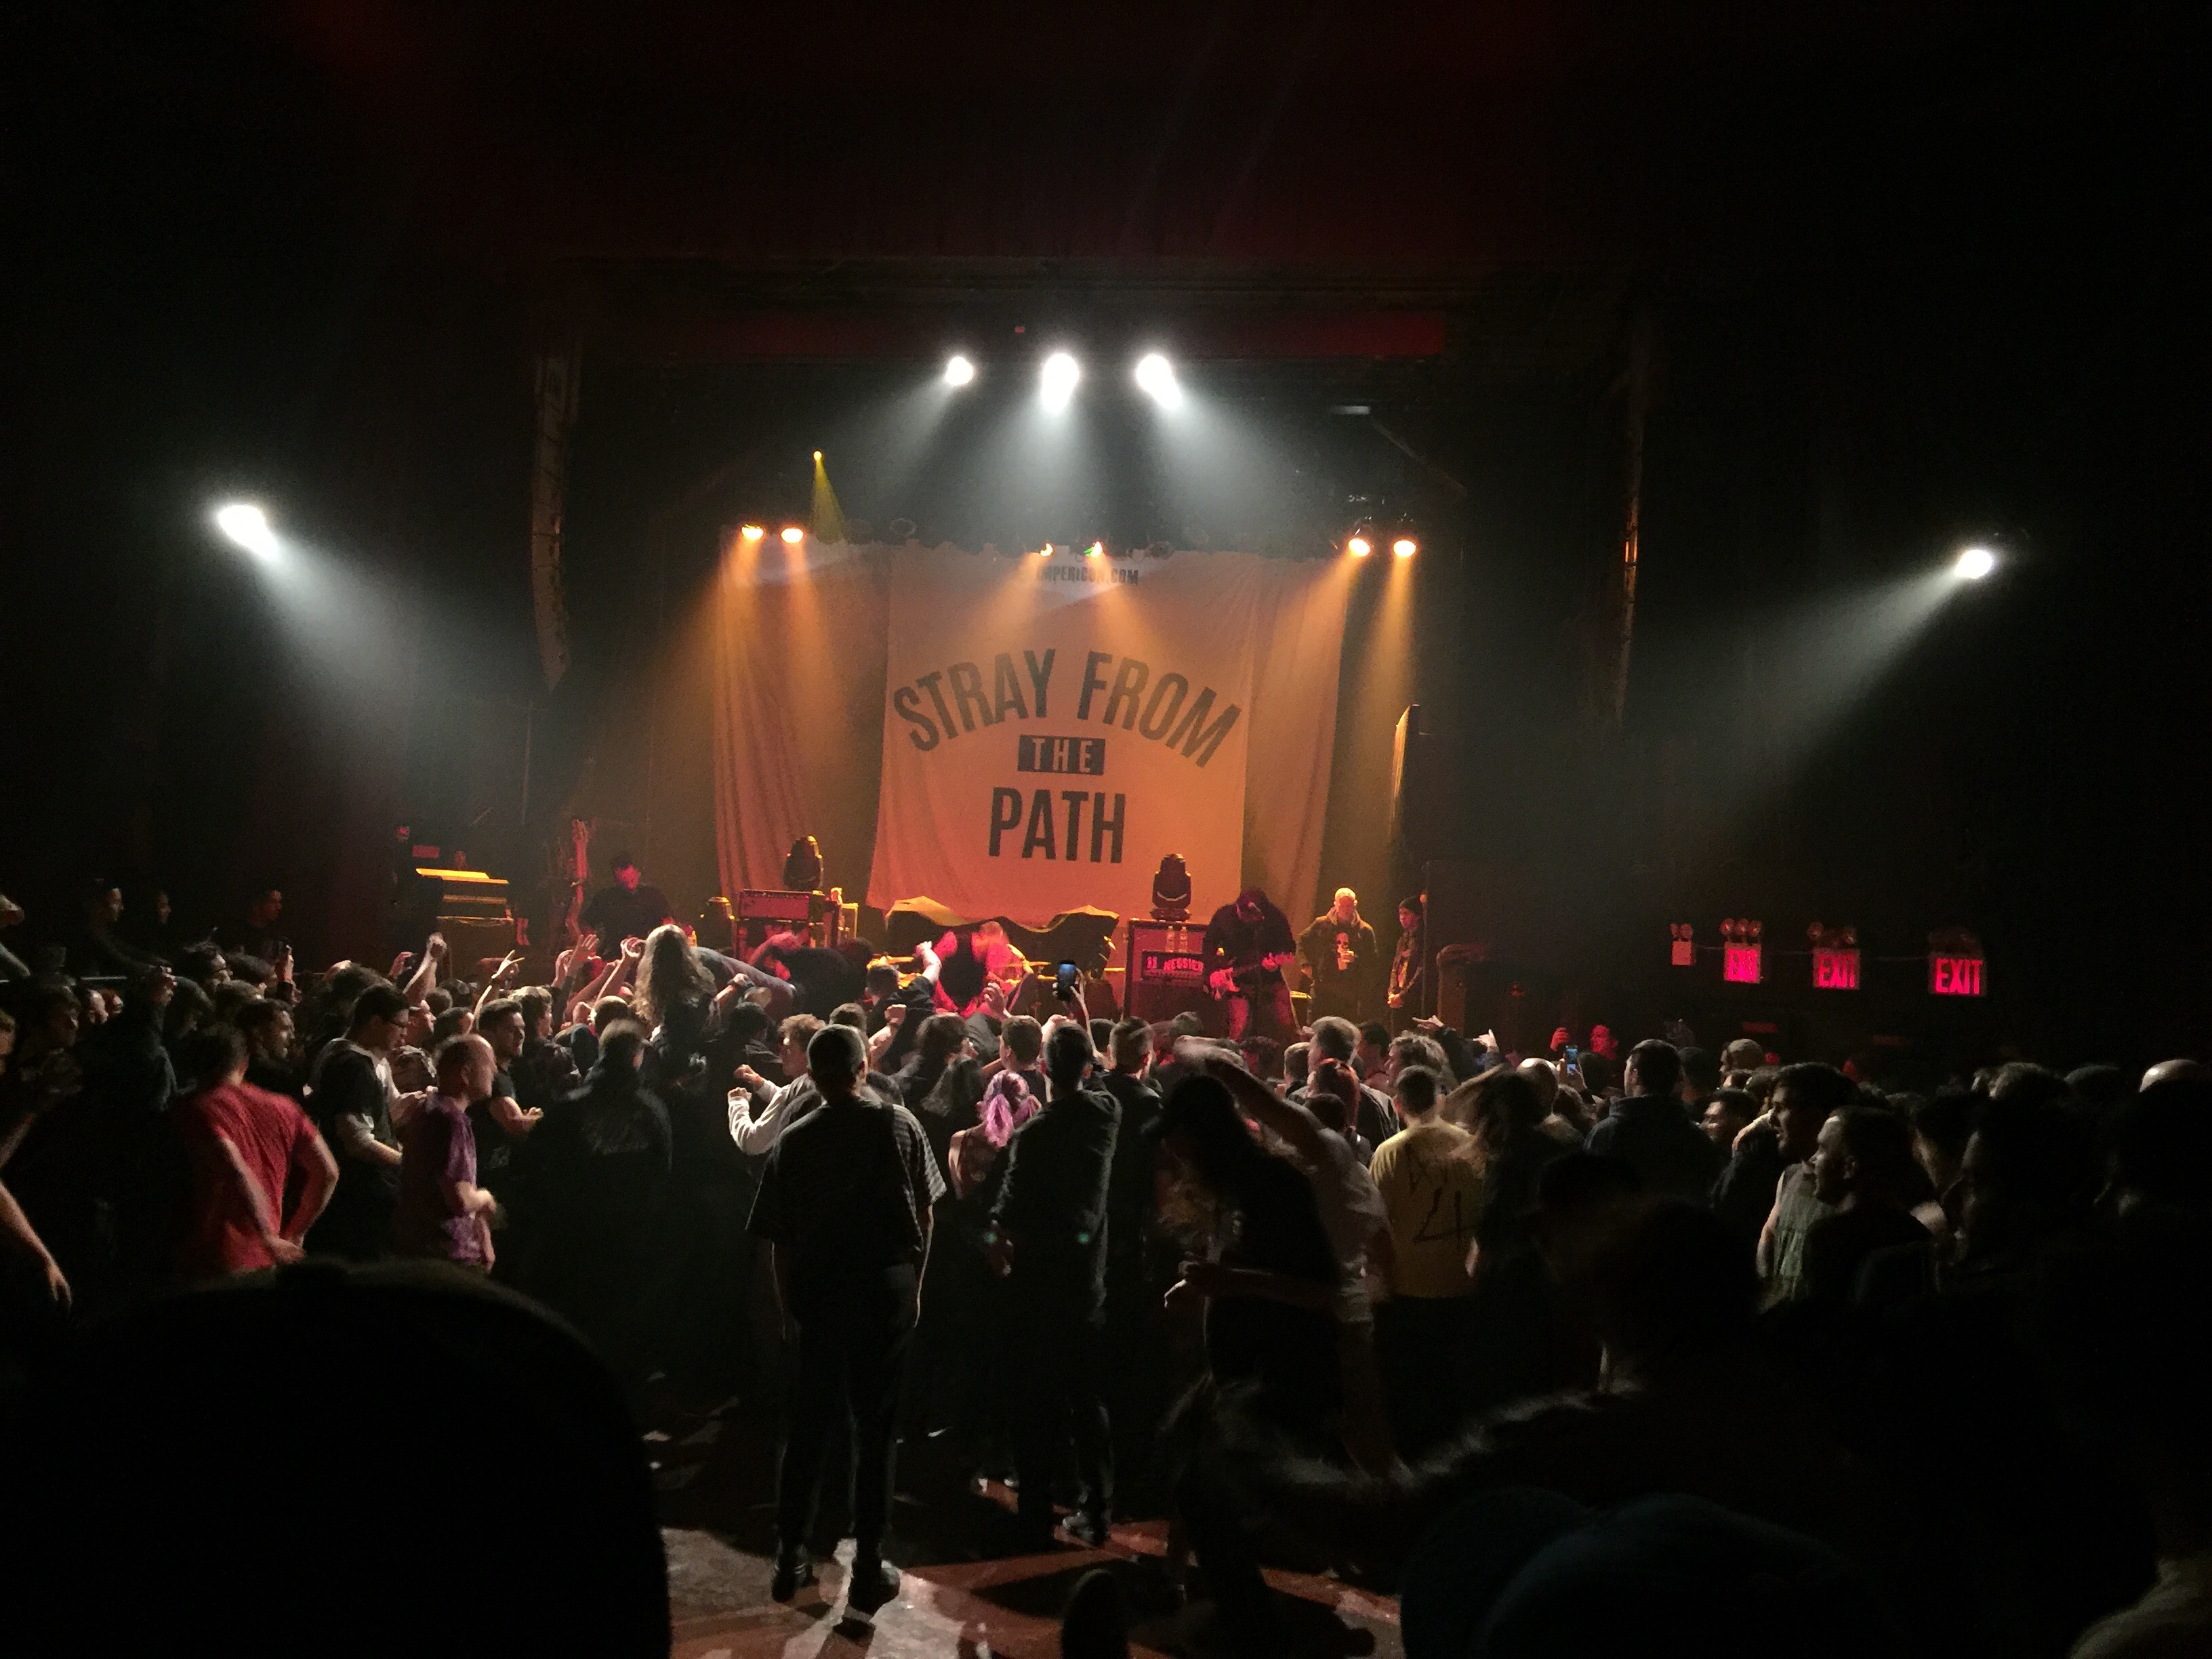 Stray From The Path playing at Gramercy Theater in Manhattan on Saturday Apr 1. Can you spot the Messier tribute?"